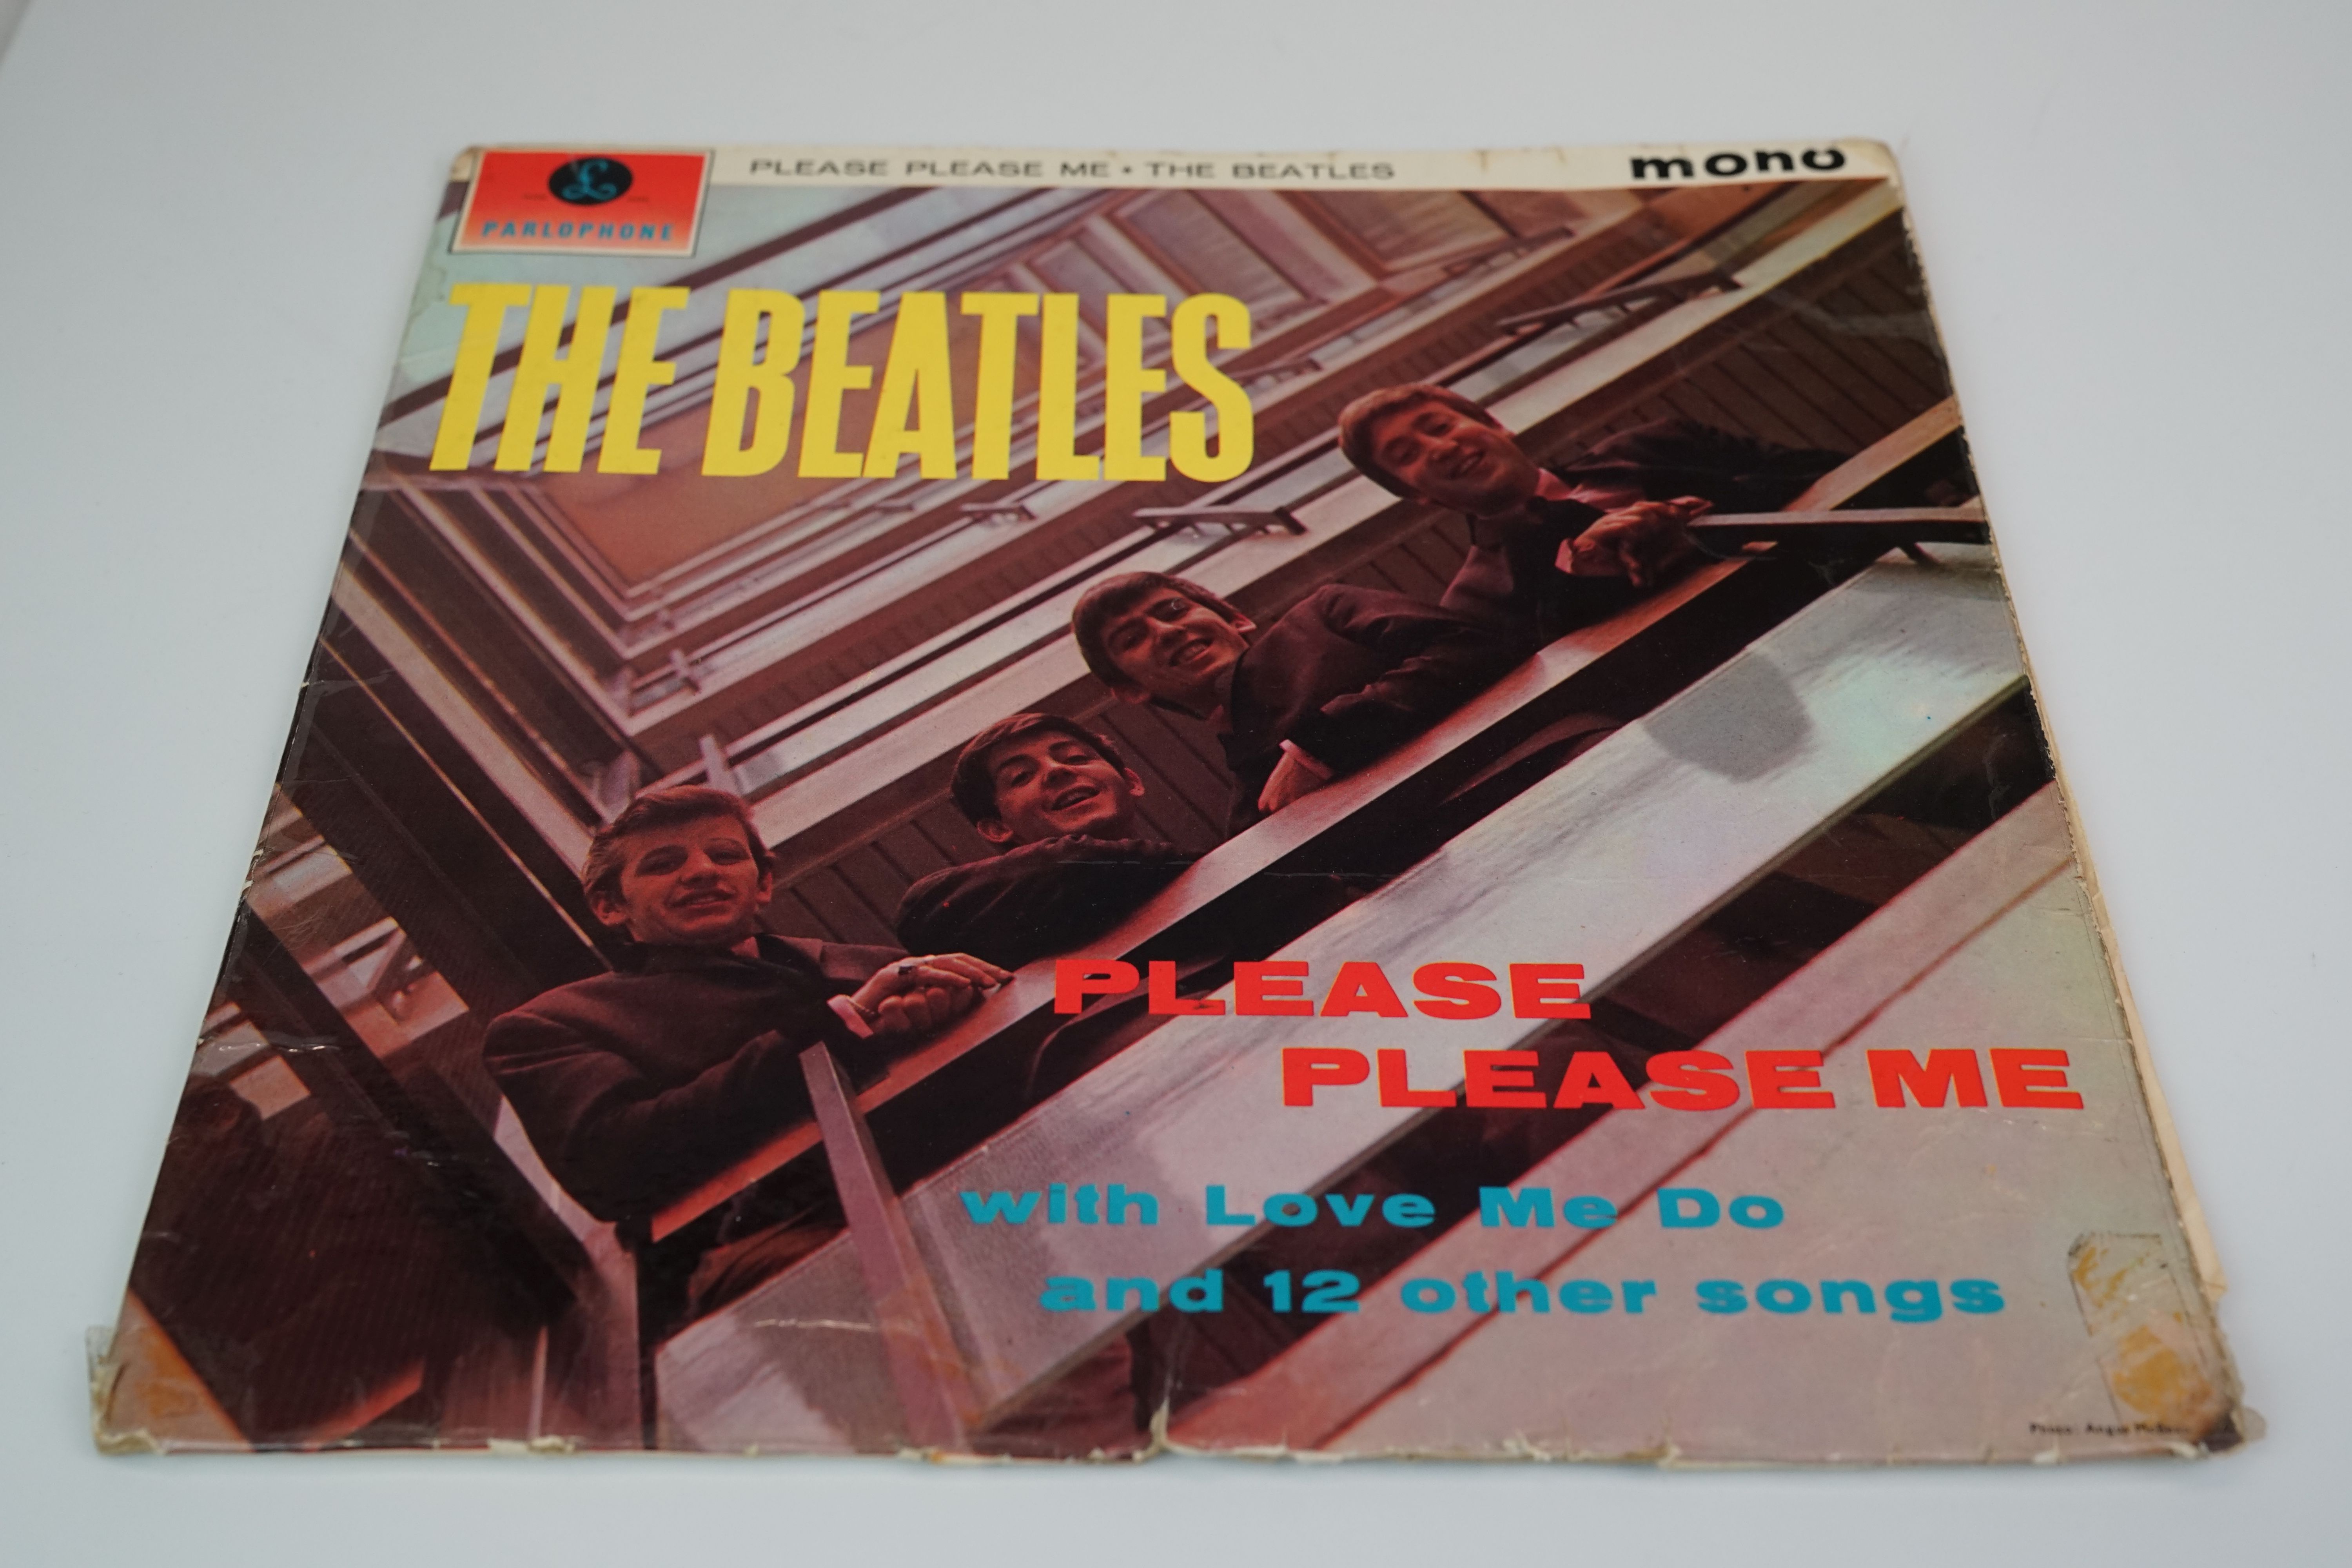 Vinyl - The Beatles Please Please Me (PMC 1202) Mono, early pressing with black and gold label,